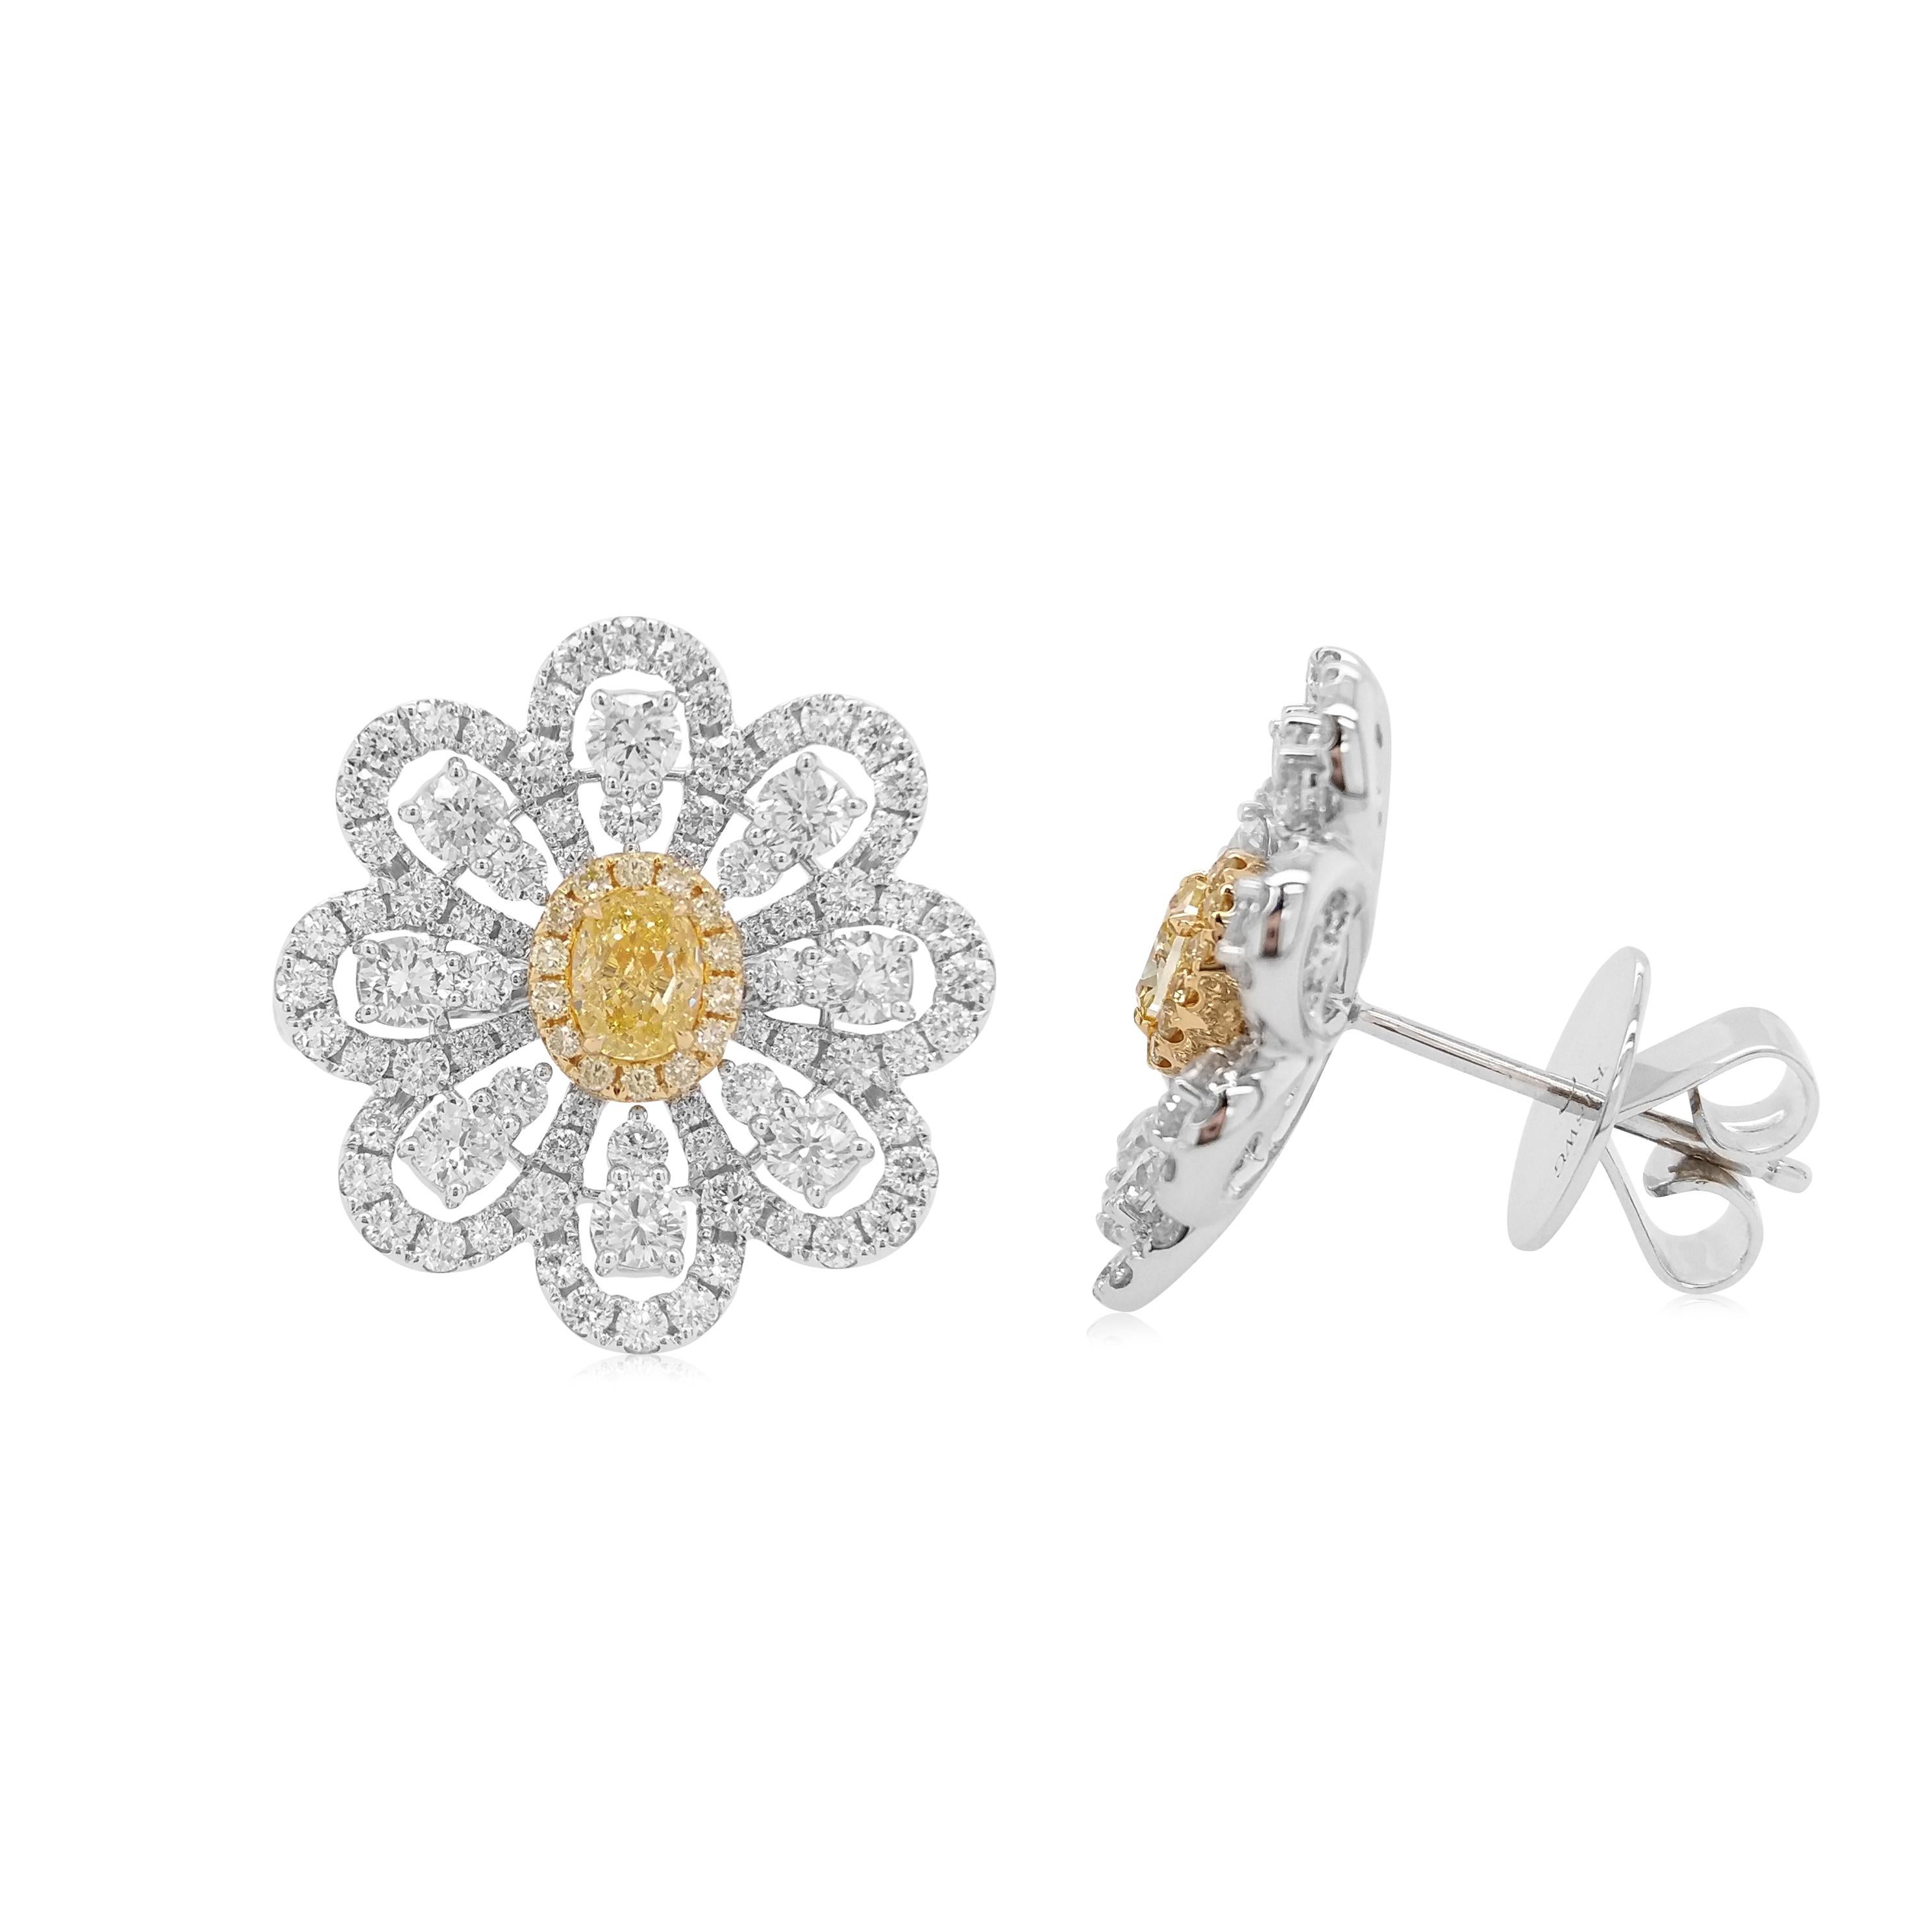 Oval Cut Certified Yellow and White Diamond K18 Gold Earrings